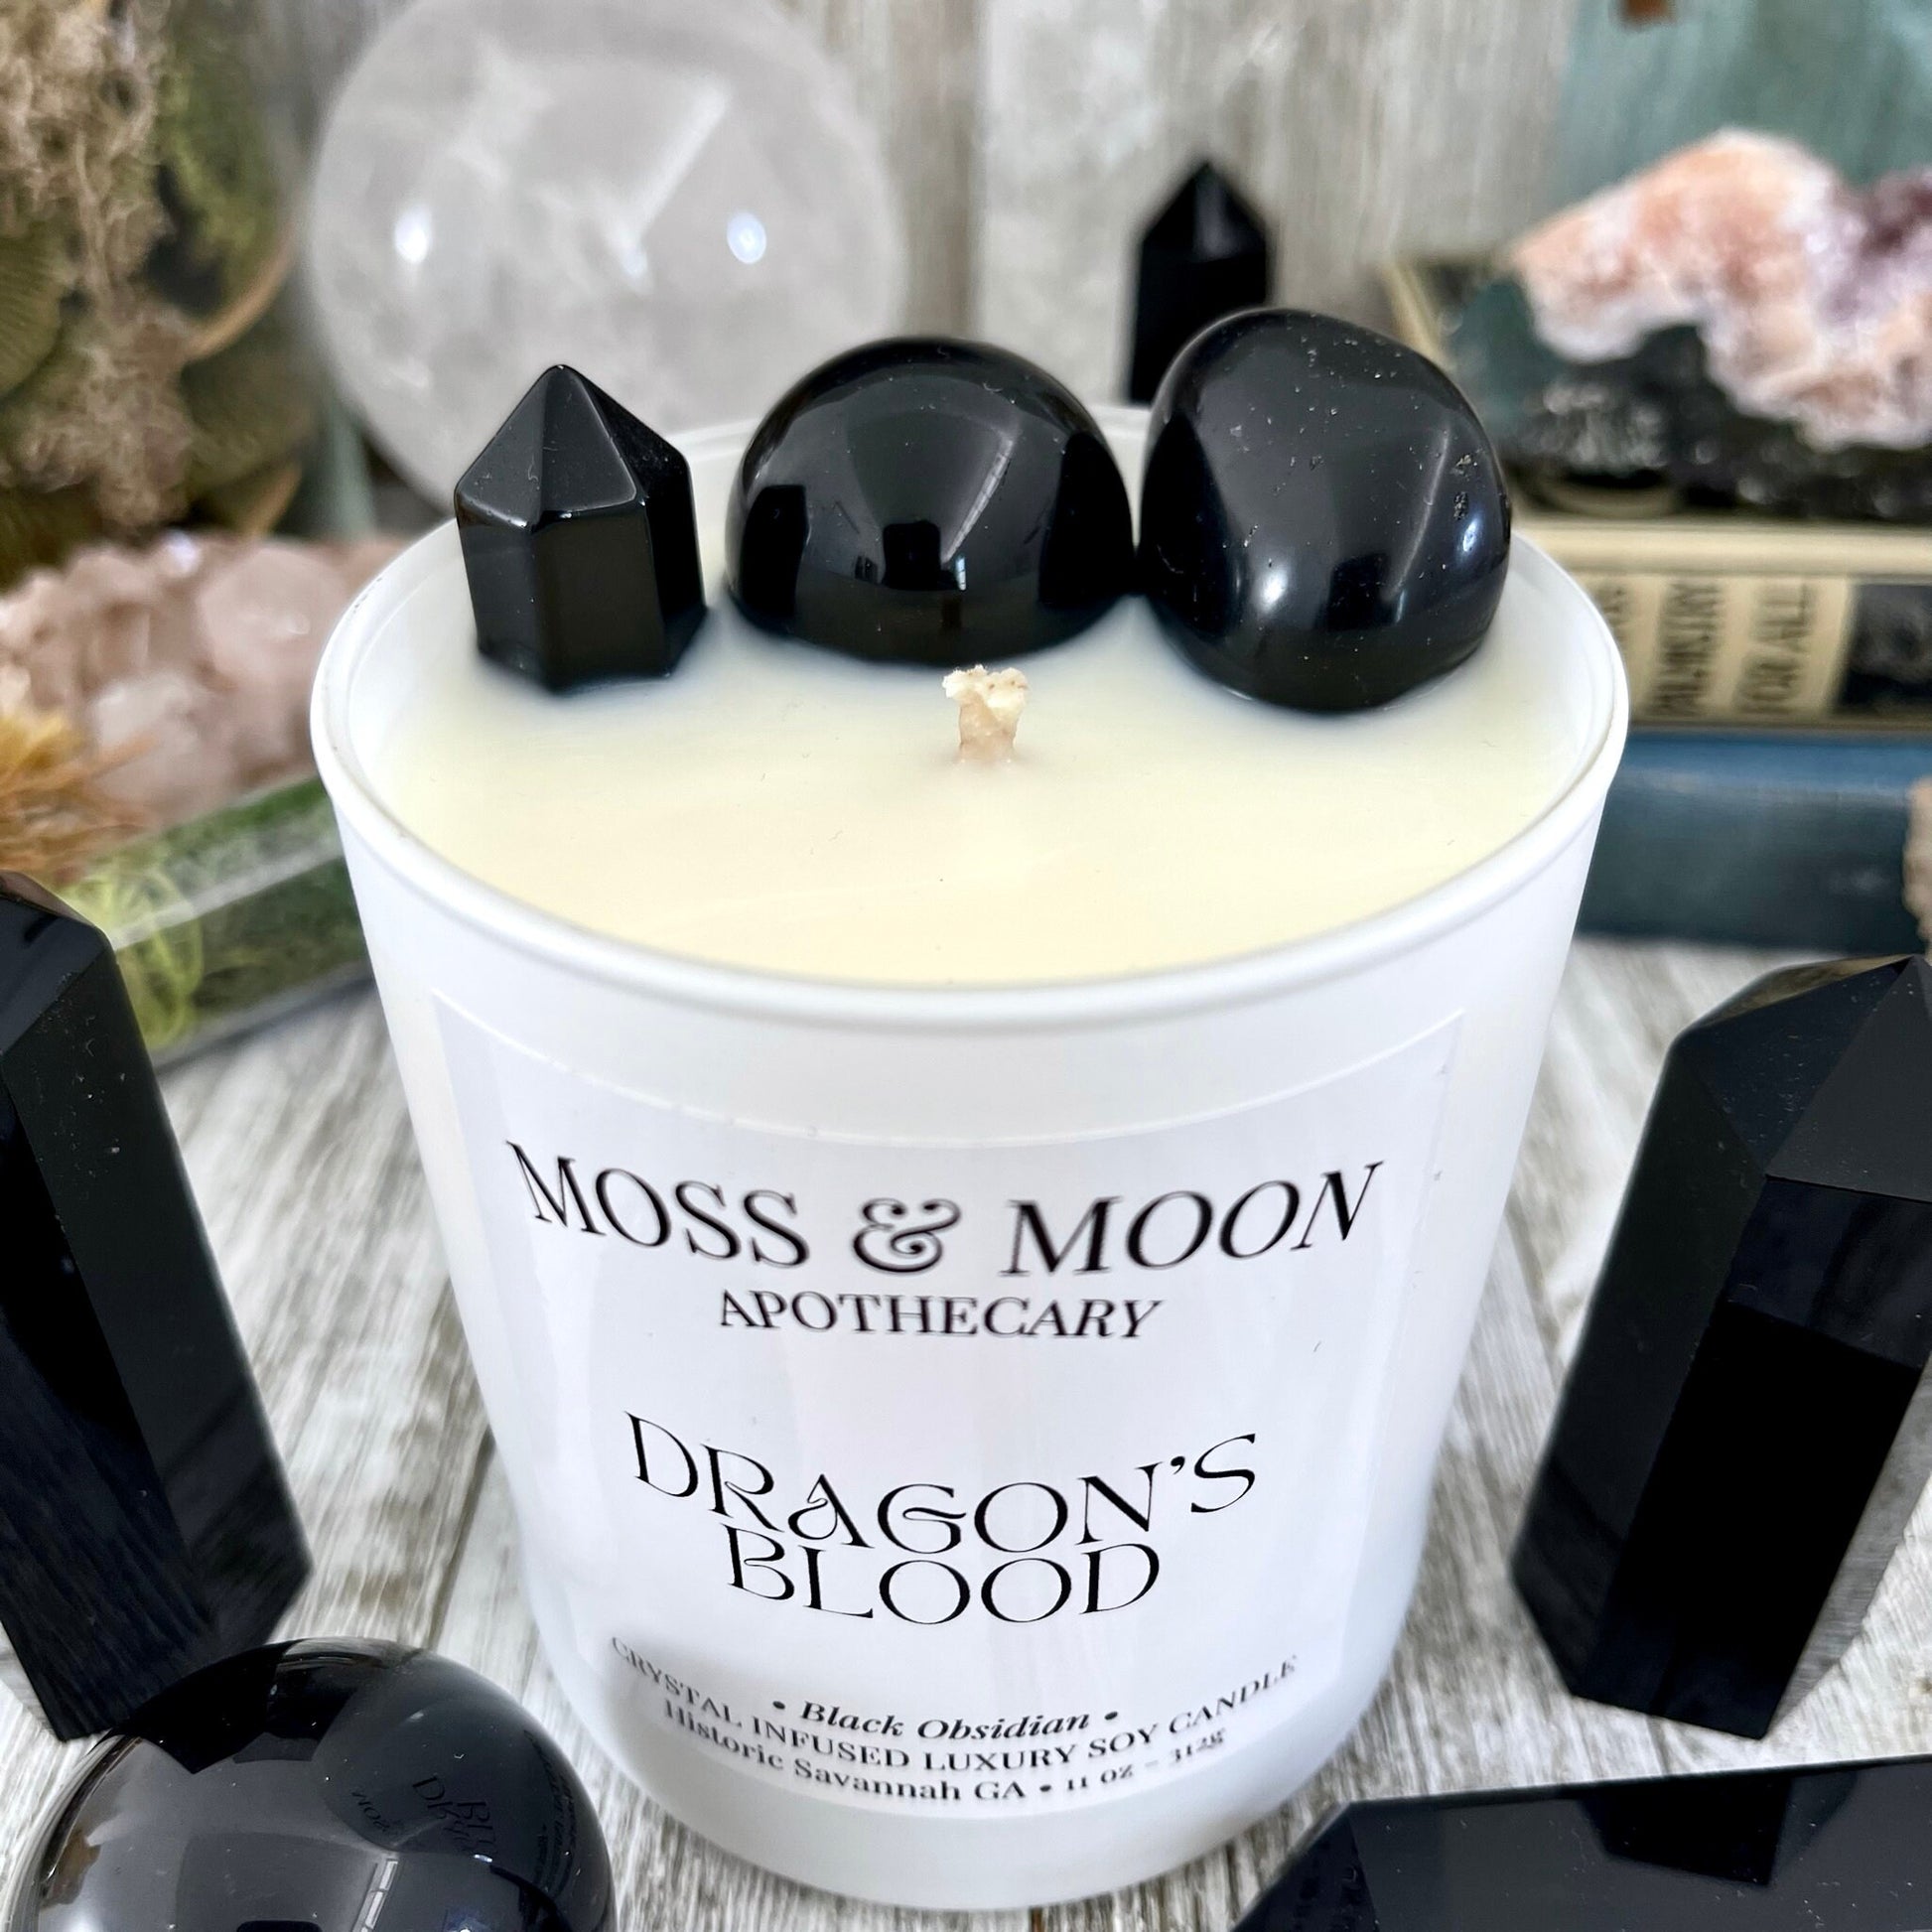 aromatherapy candle, Candles, Candles & Holders, cedar candle, clove candle, Container Candles, crystal candle, Crystal Candles, dragon blood candle, Dragon's Blood, Etsy ID: 1480254409, Home & Living, Home Decor, meditation candle, natural candles, obsid